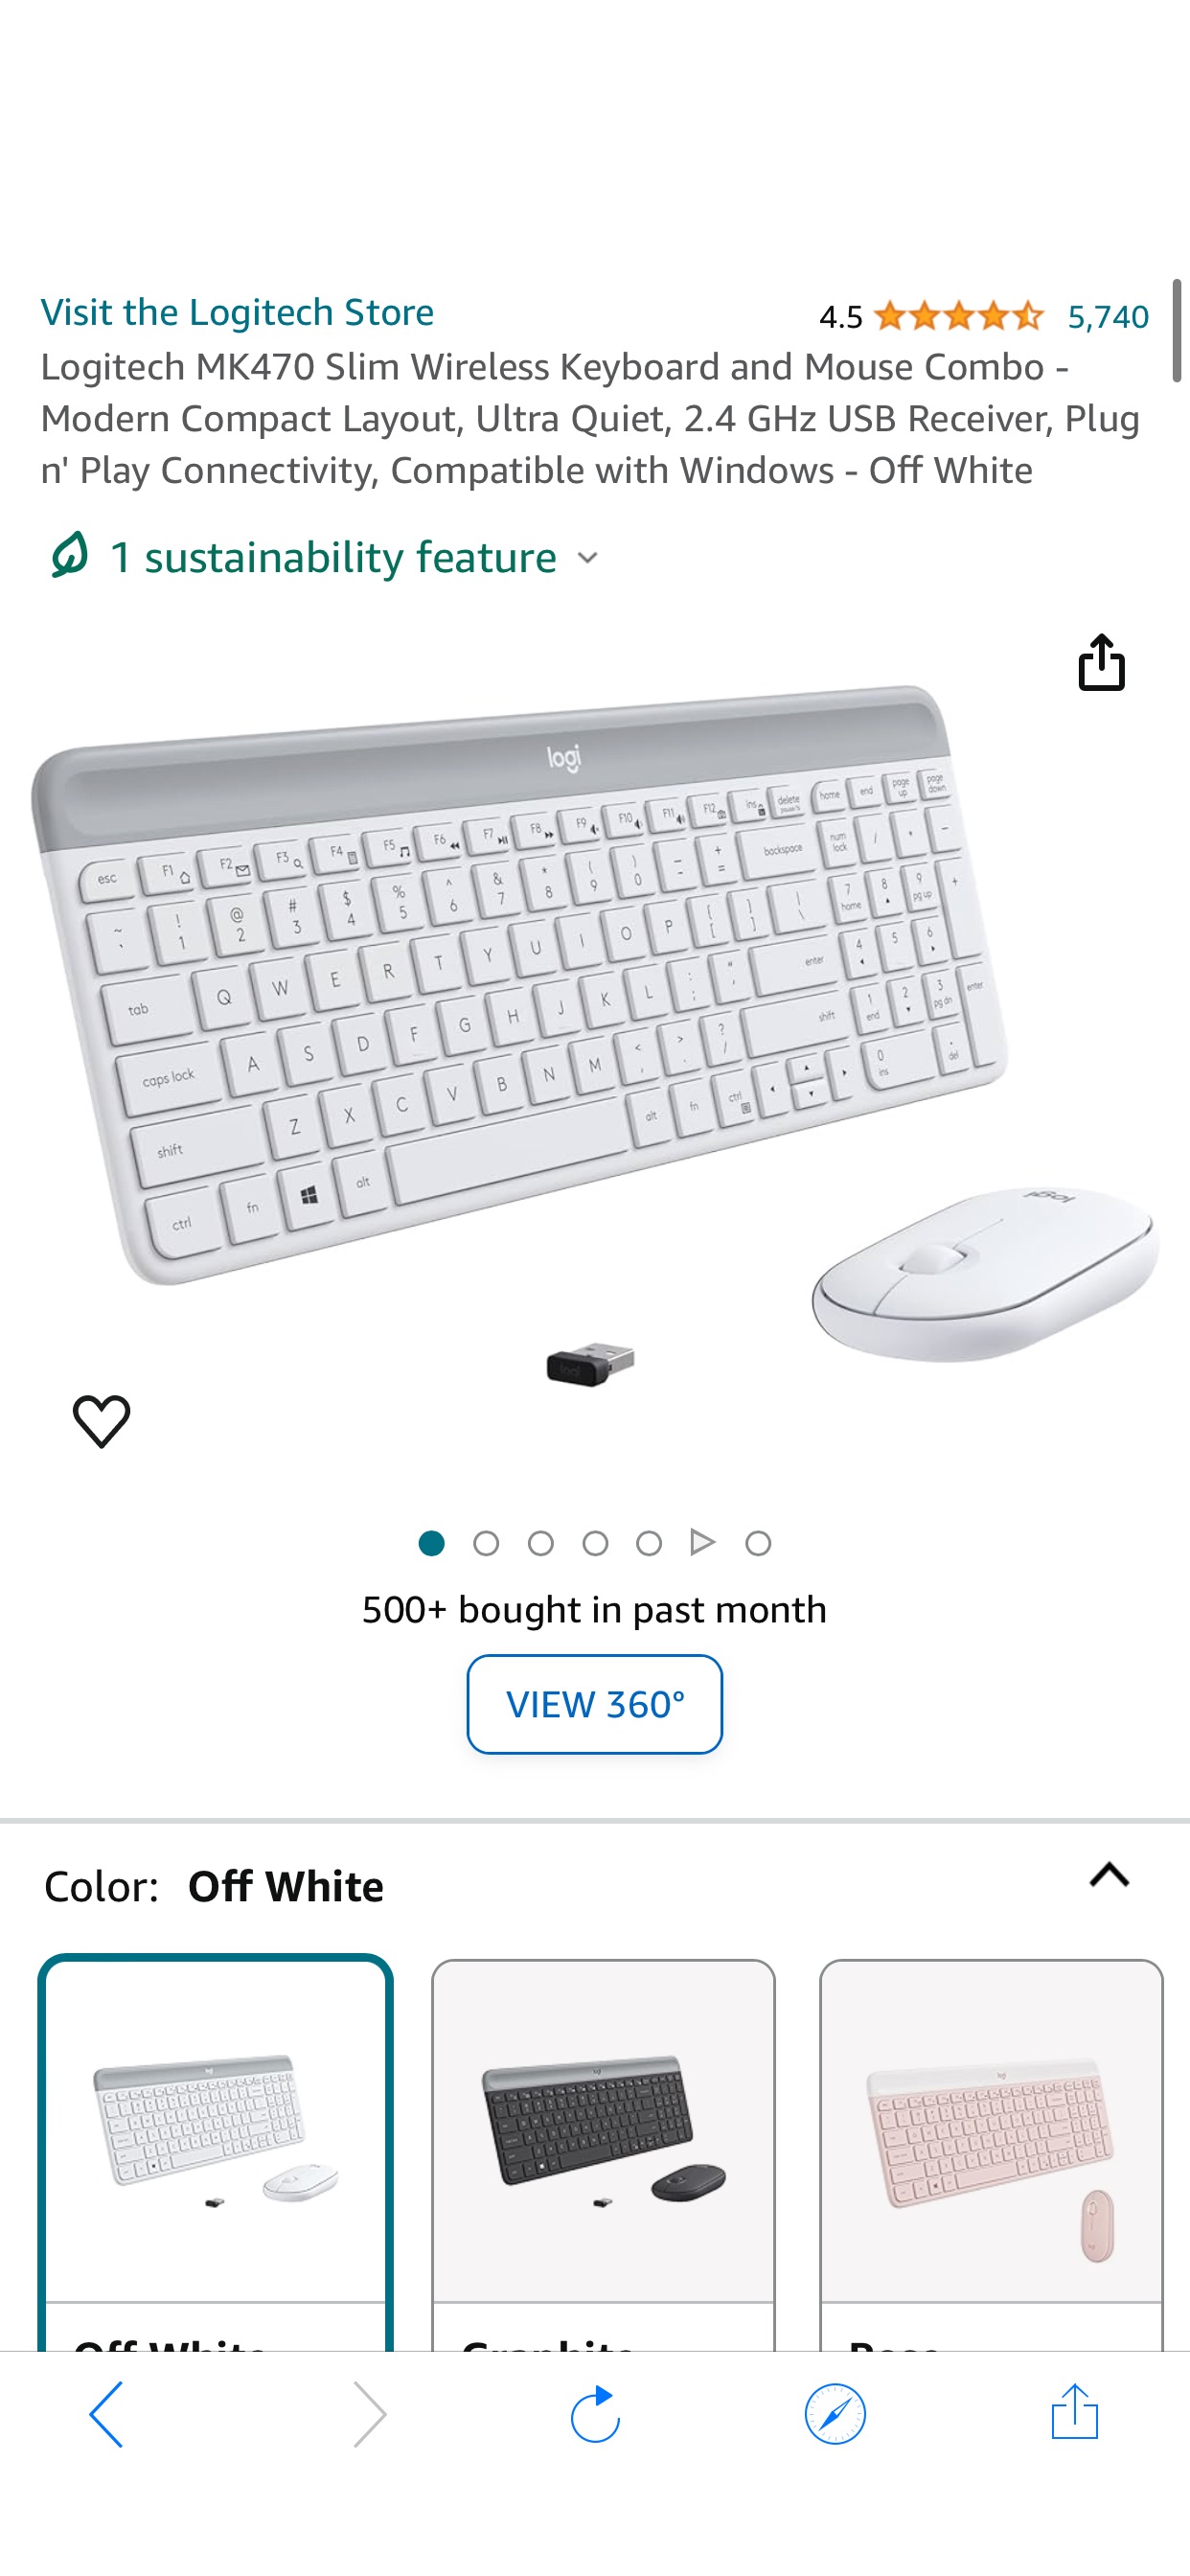 Amazon.com: Logitech MK470 Slim Wireless Keyboard and Mouse Combo - Modern Compact Layout, Ultra Quiet, 2.4 GHz USB Receiver, Plug n' Play Connectivity, Compatible with Windows - Off White : Electroni